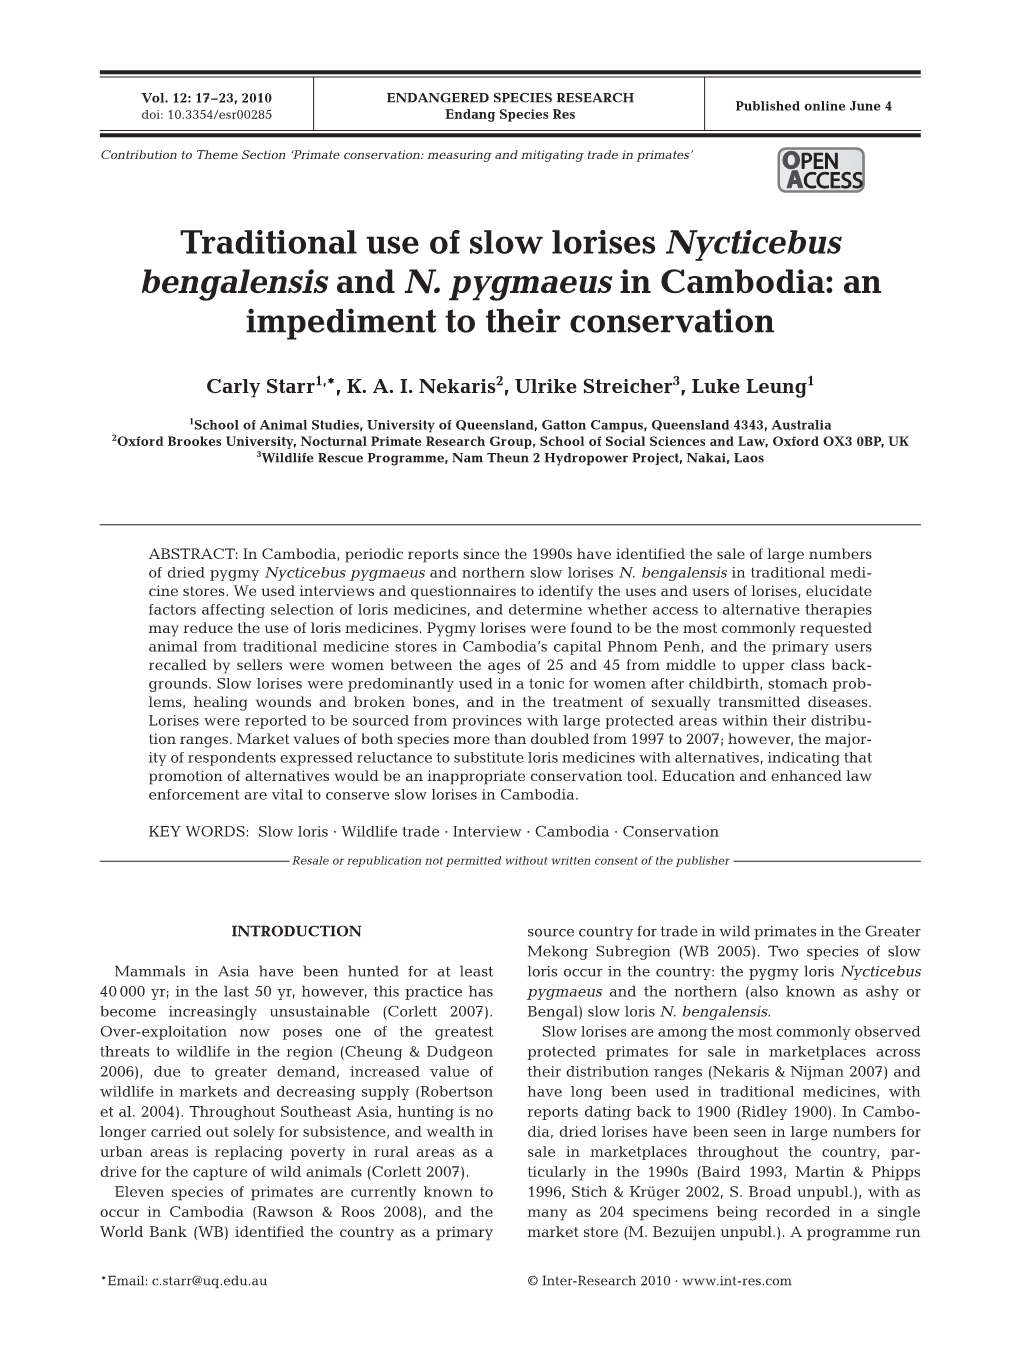 Traditional Use of Slow Lorises Nycticebus Bengalensis and N